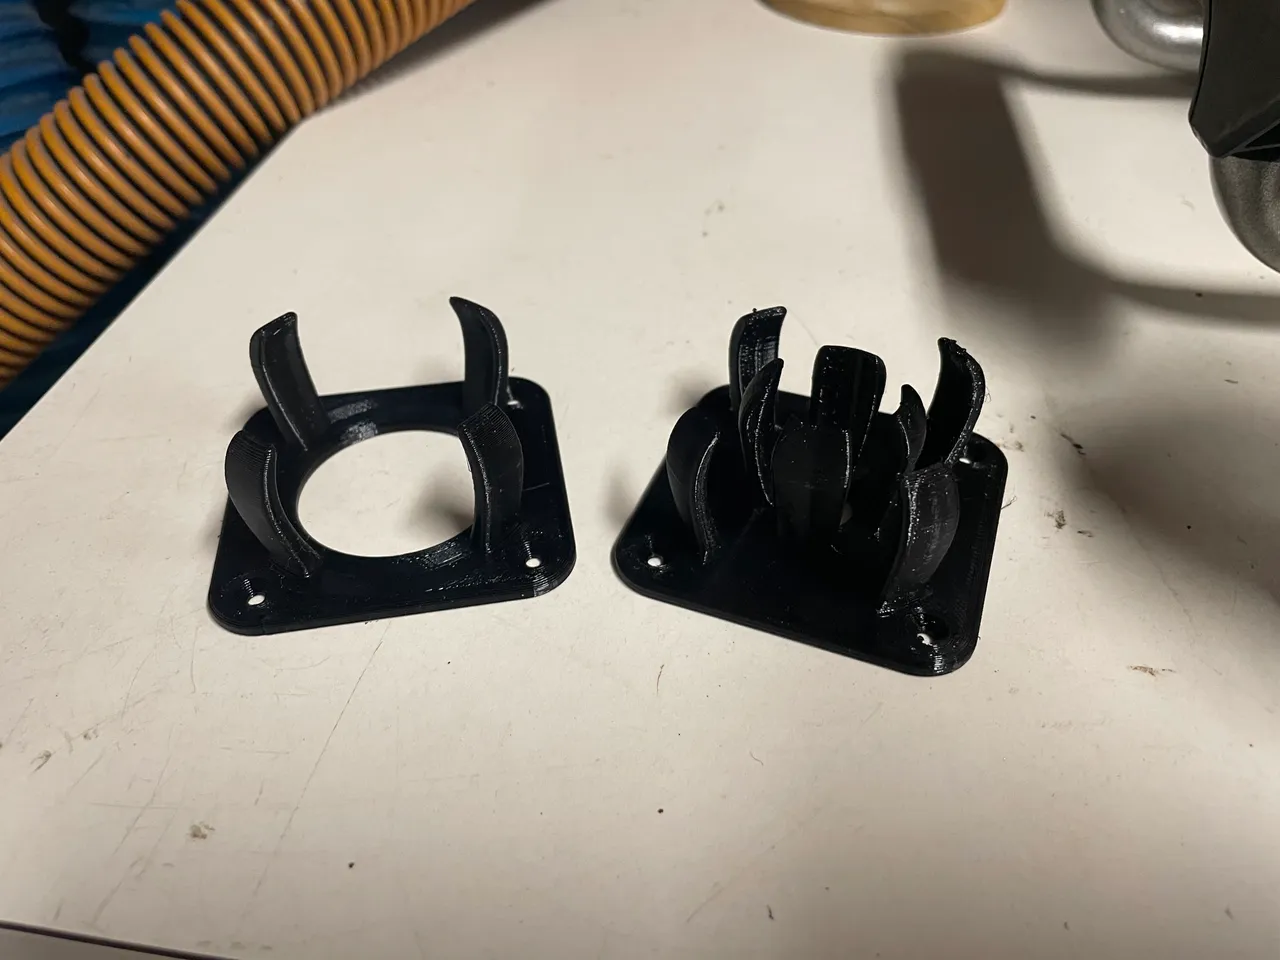 Shop Vac Attachment Mount for 2.5, 1.25, and some 1.875 (1⅞